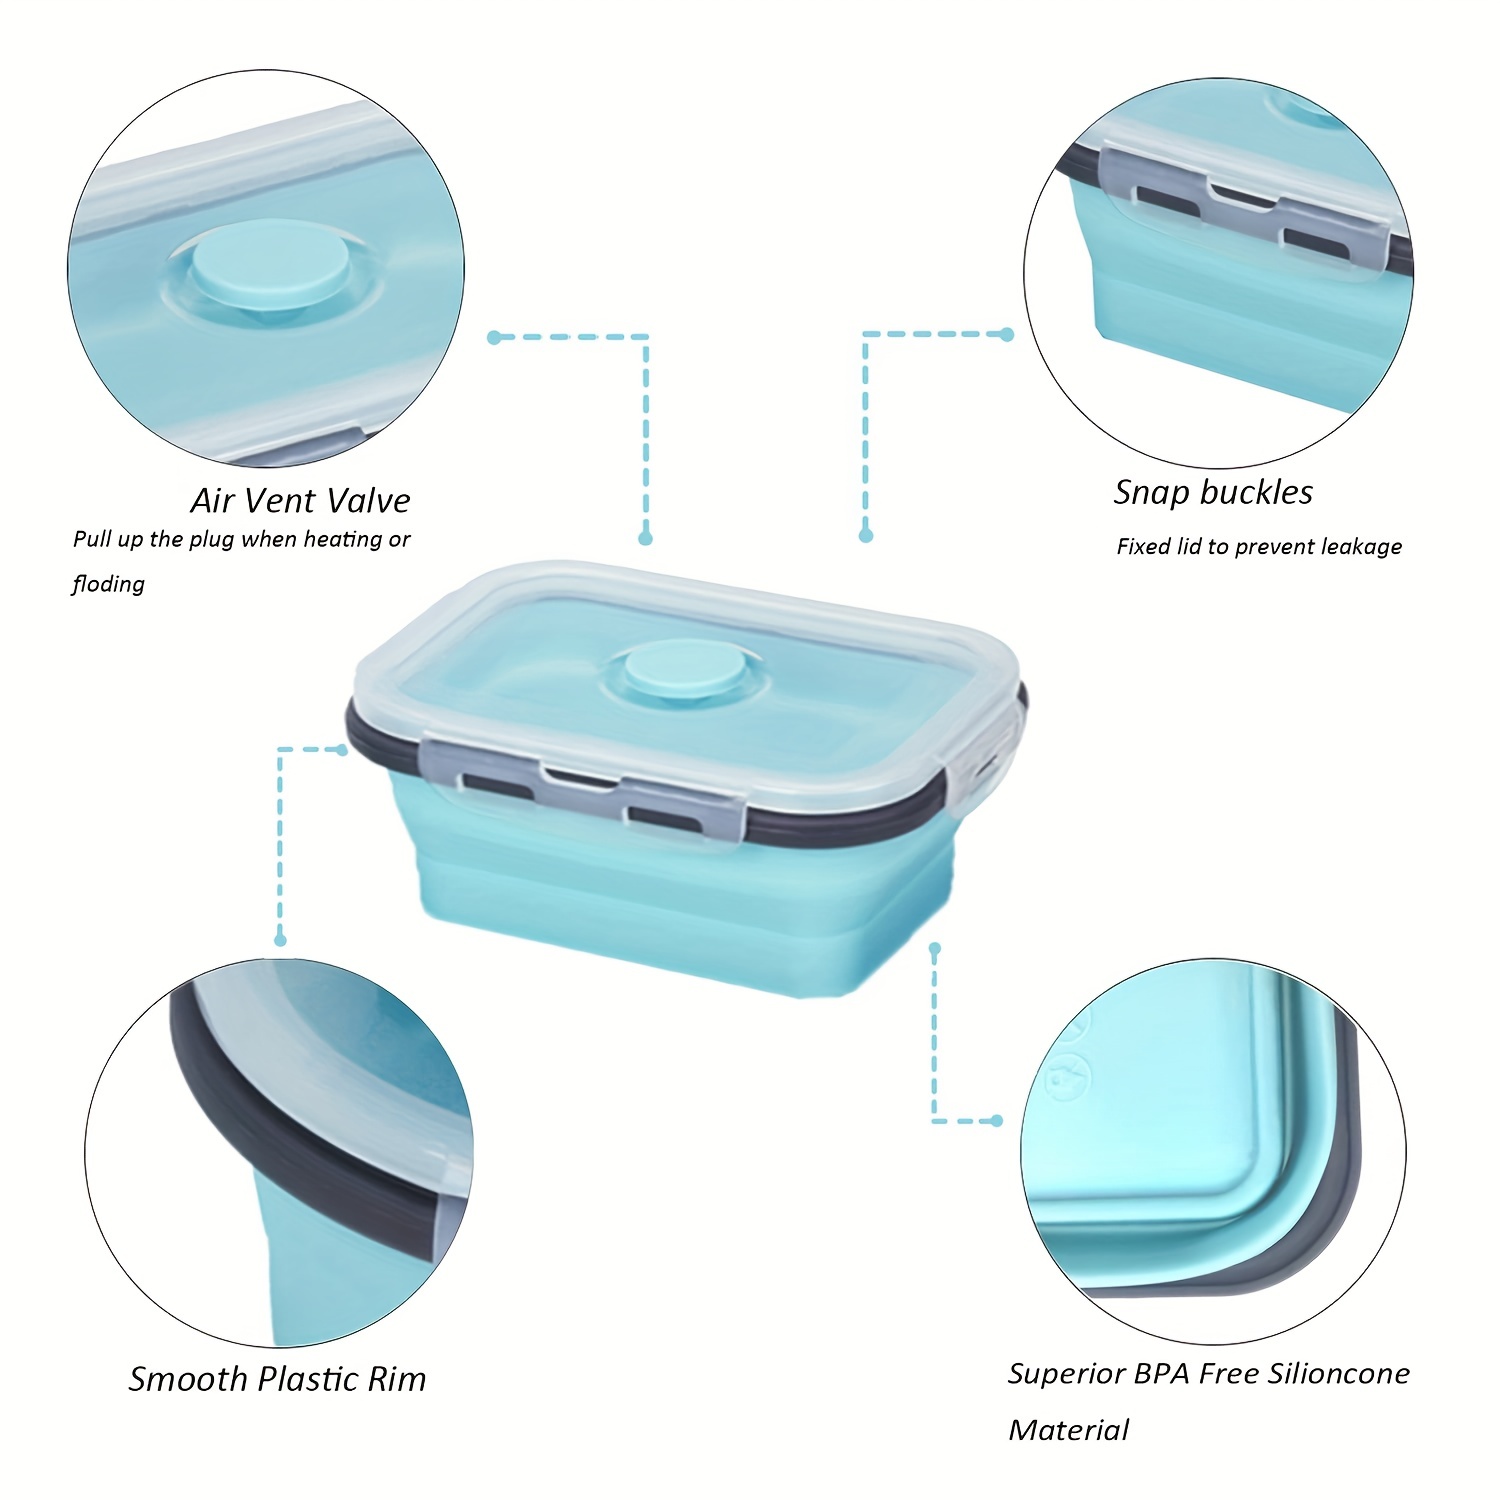 Bpa-free Silicone Collapsible Lunch Box - Portable Food Storage